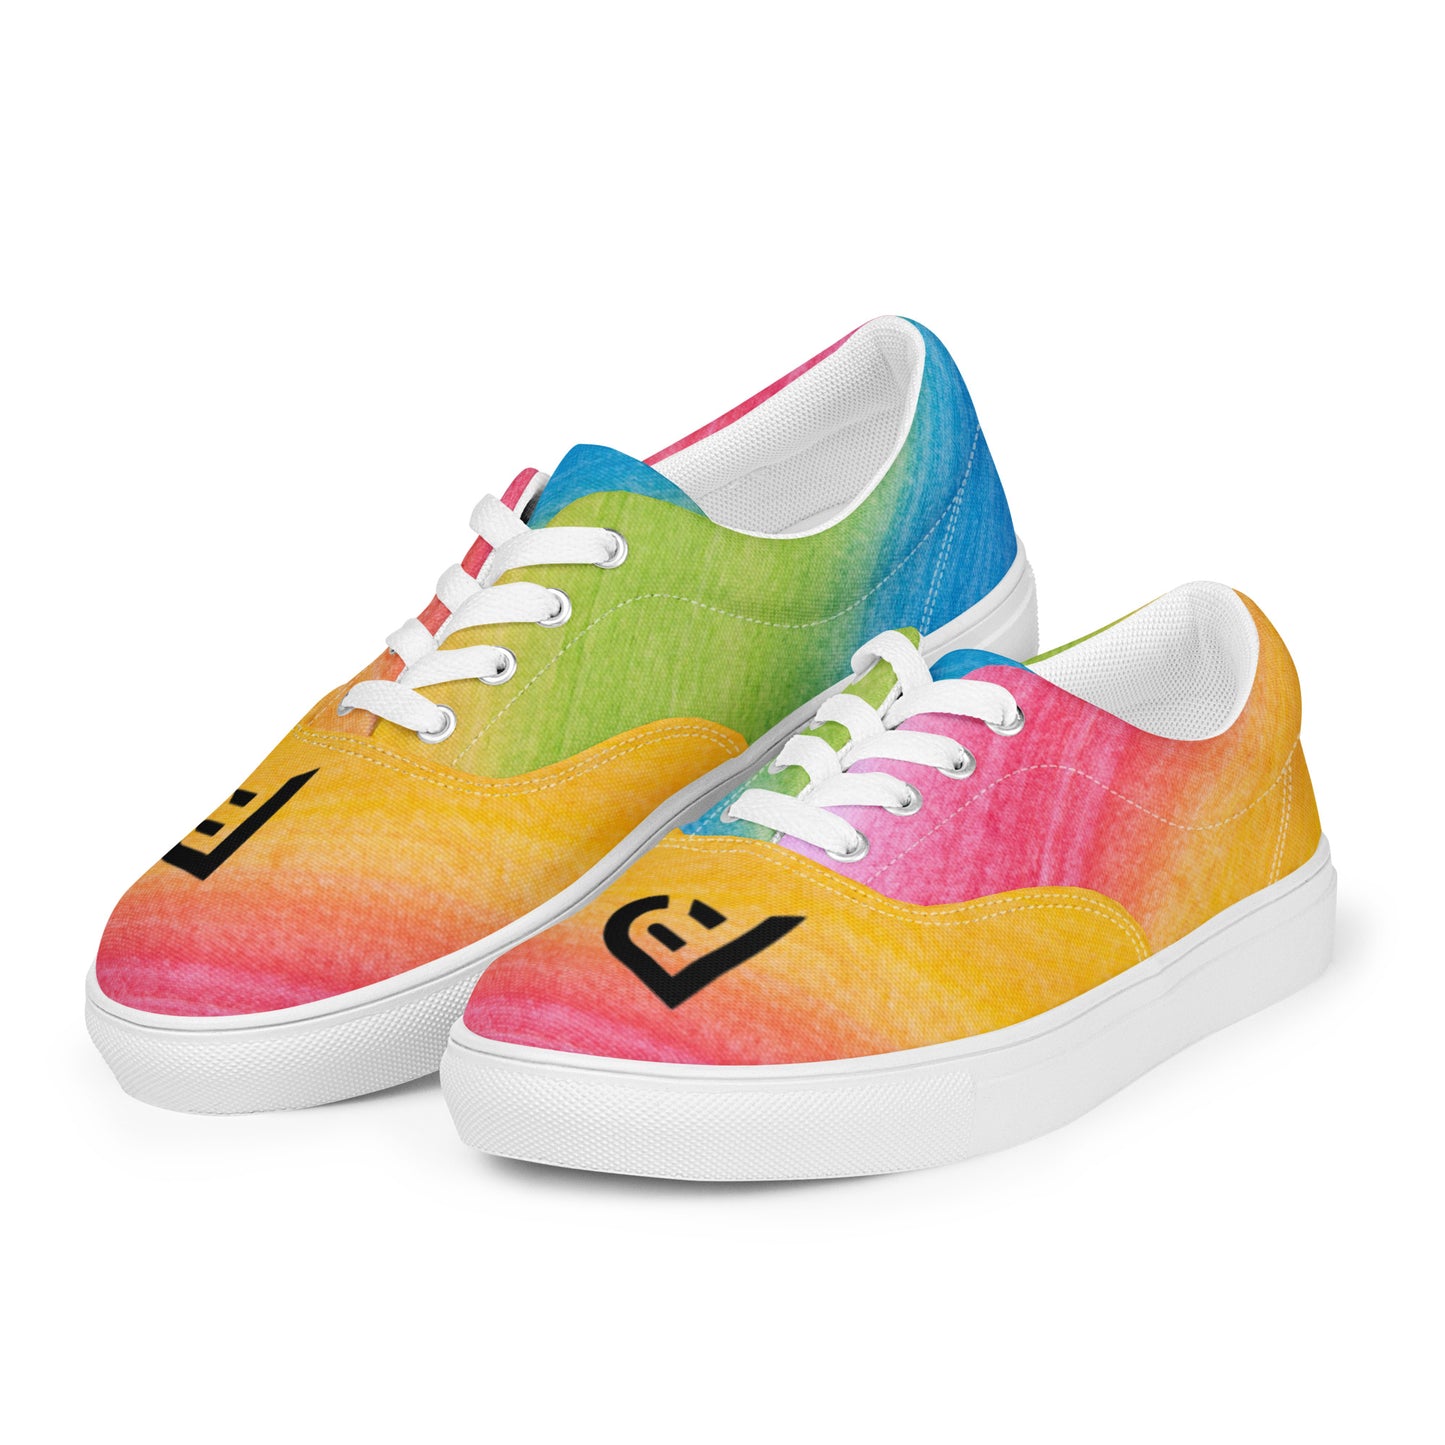 Red Weapon Pastel Low Top Canvas Shoes